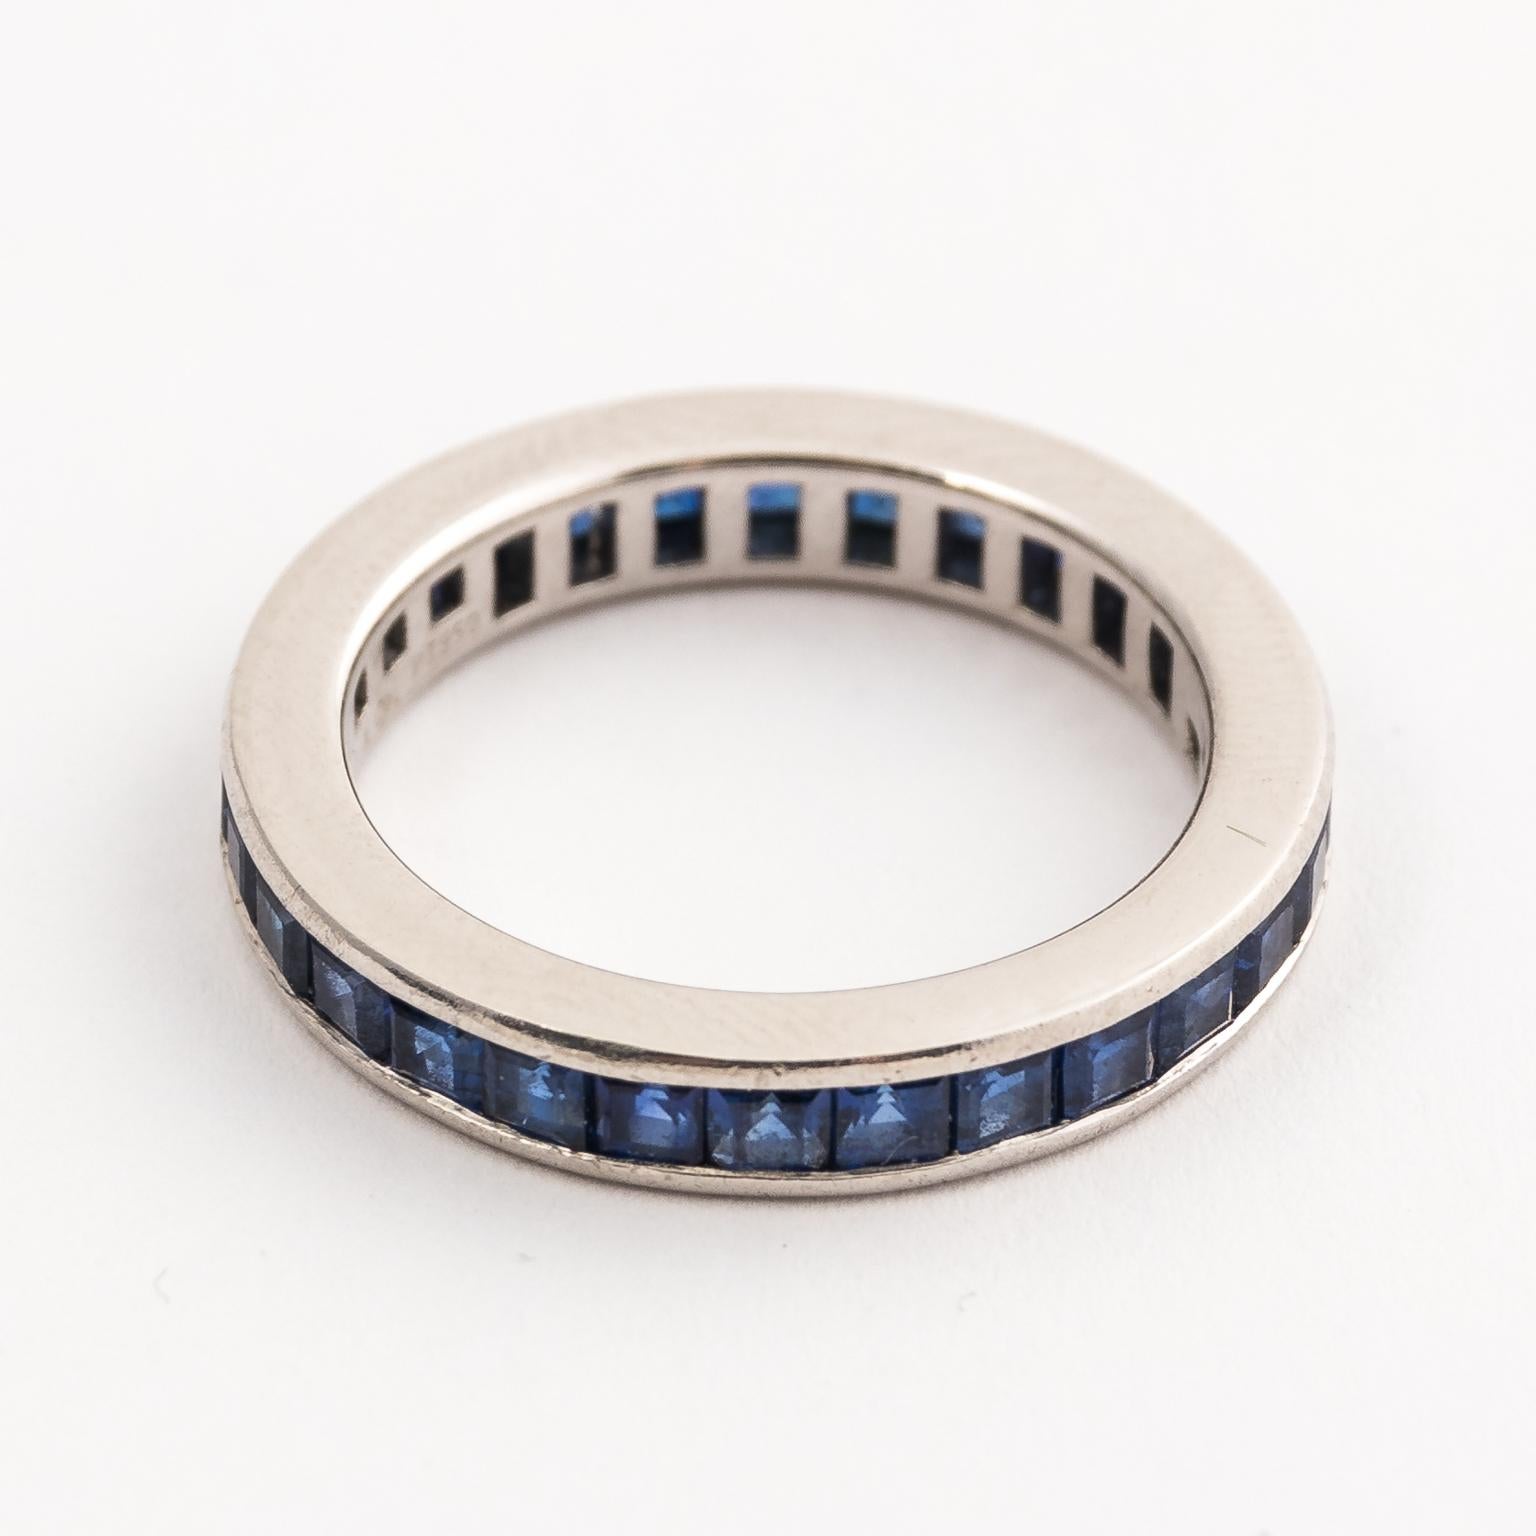 Constructed from solid platinum, the circa 1960's ring has an array of princess cut high quality natural Royal Blue Sapphires invisible set along the platinum band. The Sapphires are carefully selected with matching color, highly transparent, no